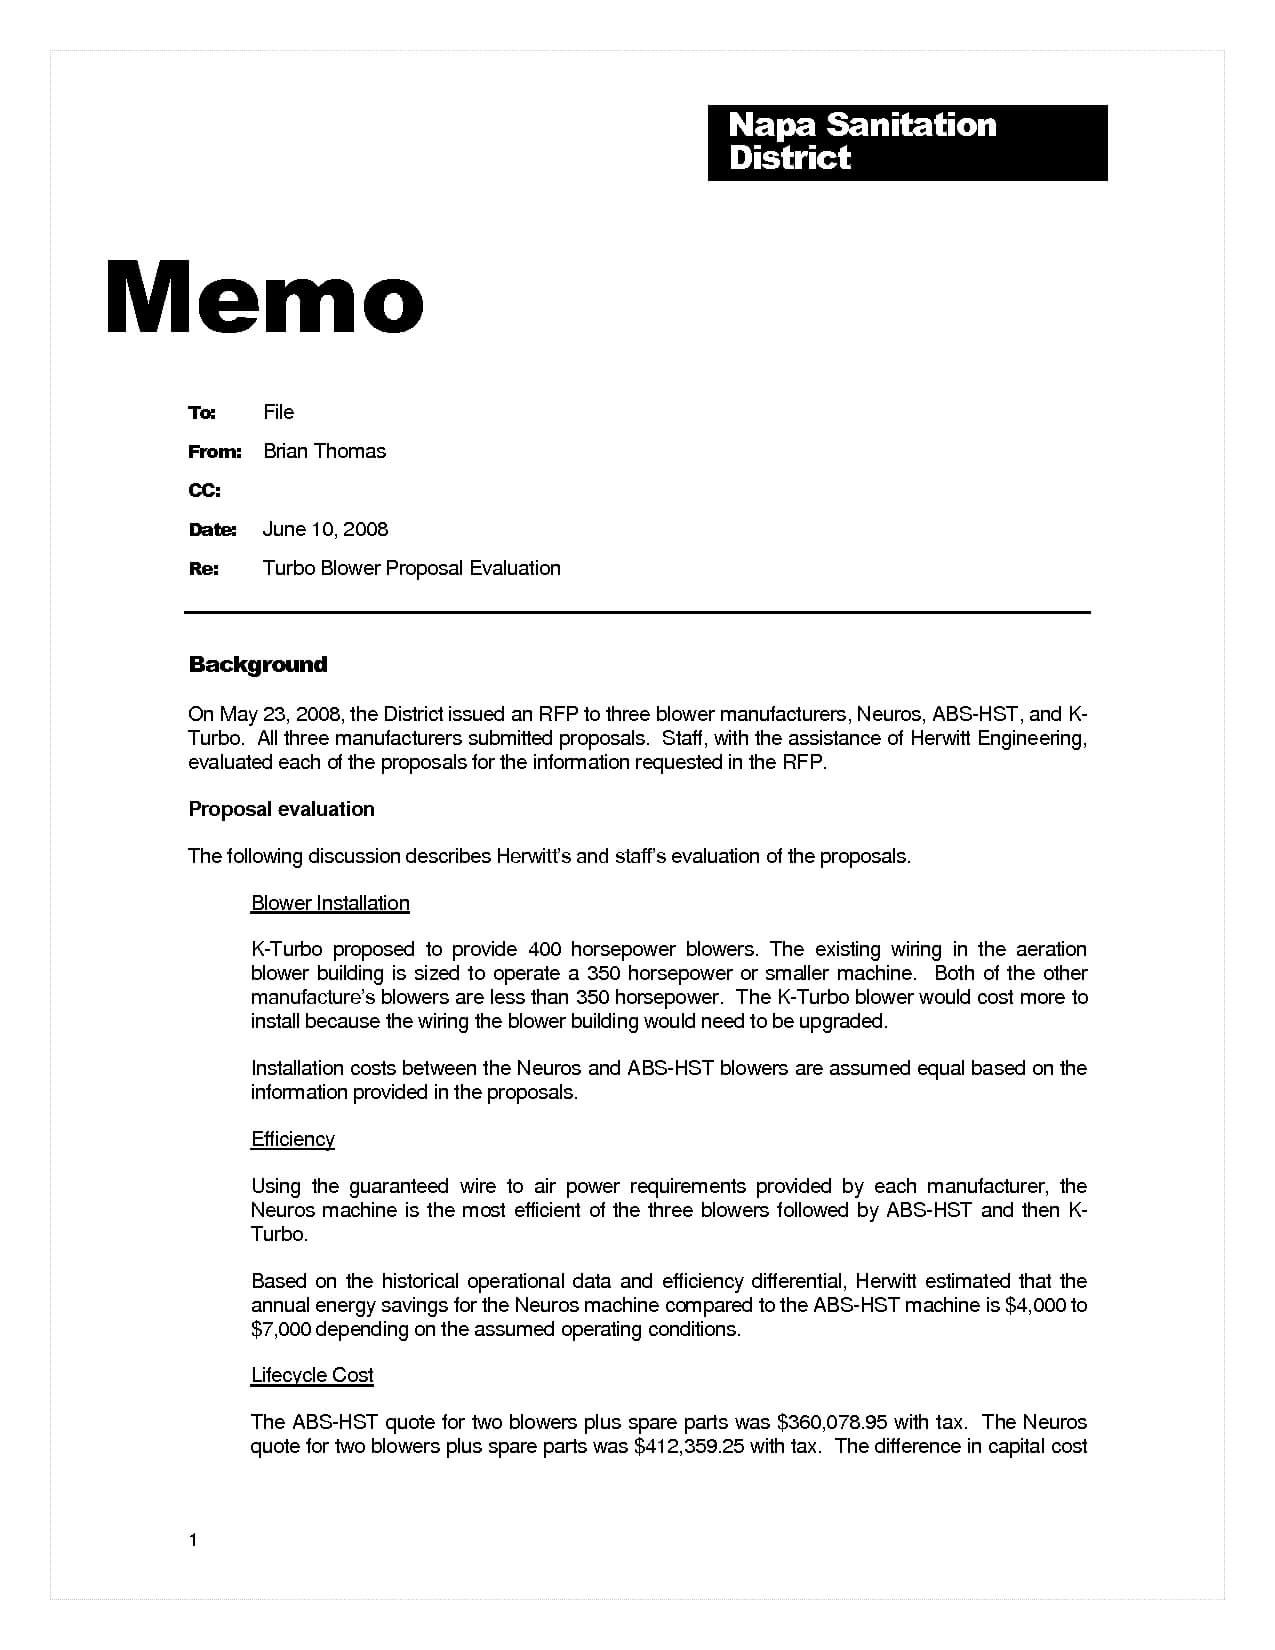 016 Memo Templates For Word Professional Business Template Pertaining To Memo Template Word 2013